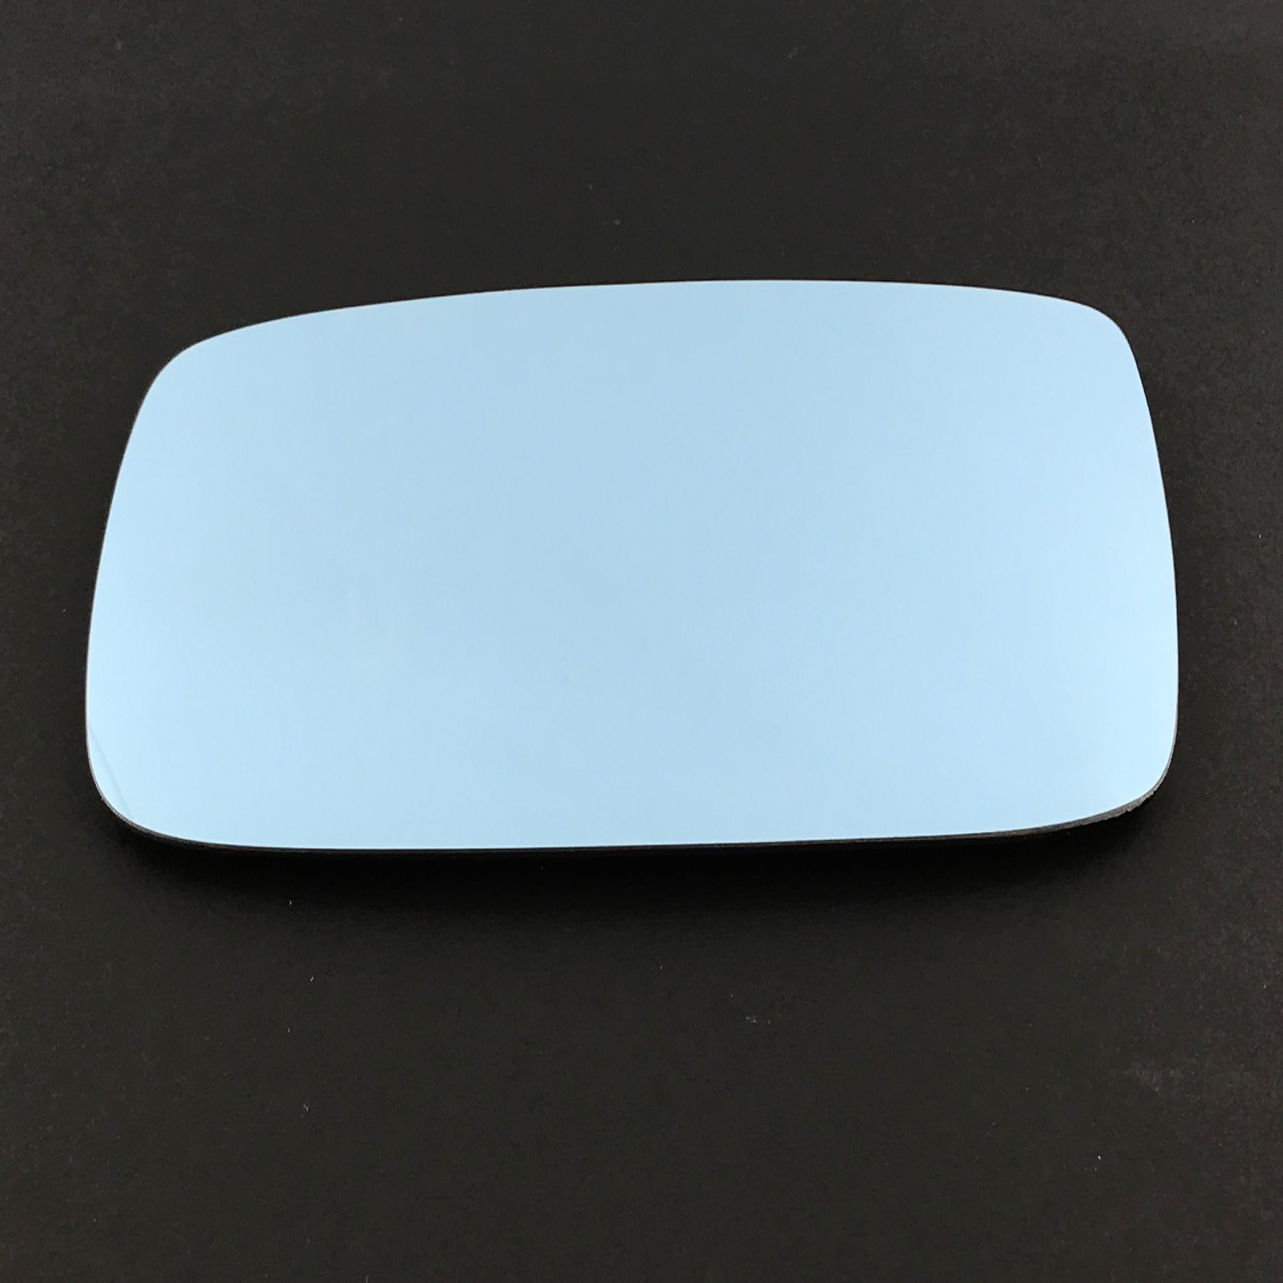 Volvo V90 Wing Mirror Glass RIGHT HAND ( UK Driver Side ) 1997 to 1998 – Convex Wing Mirror ( Blue Tinted )